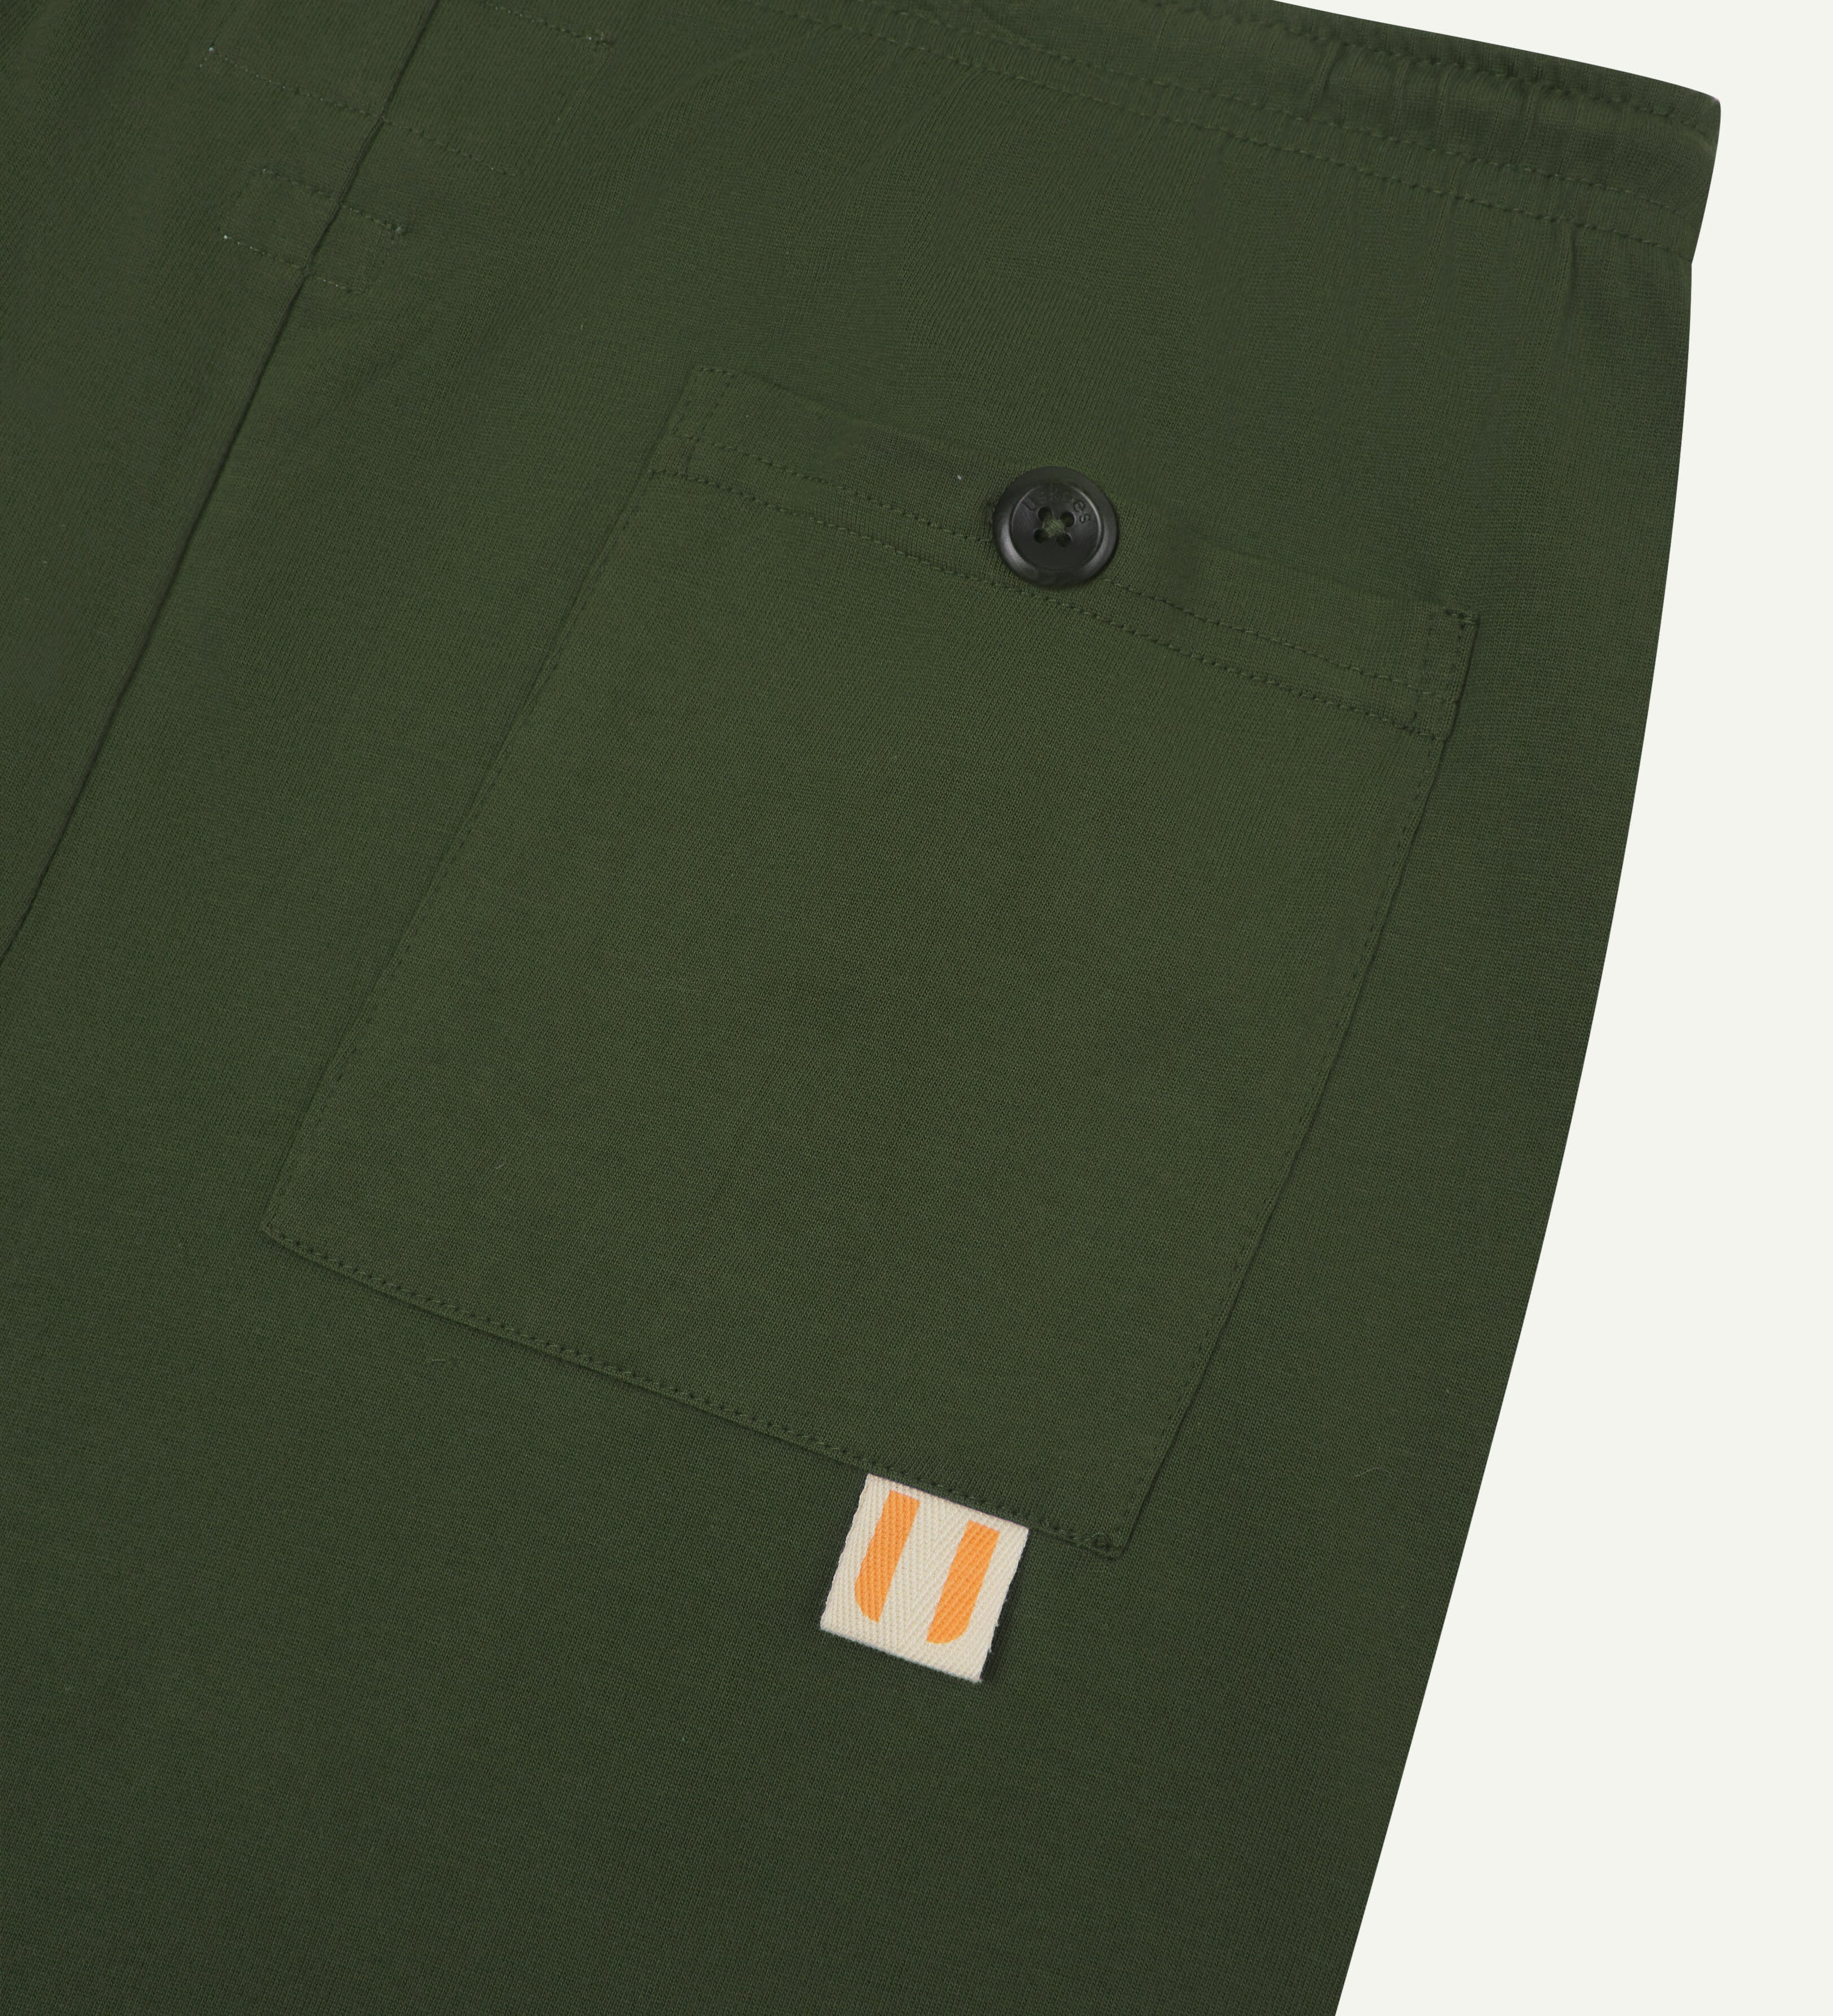 Close-up view of mid-green organic cotton #7007 jersey shorts against white background. Clear view of pocket and uskees logo label.